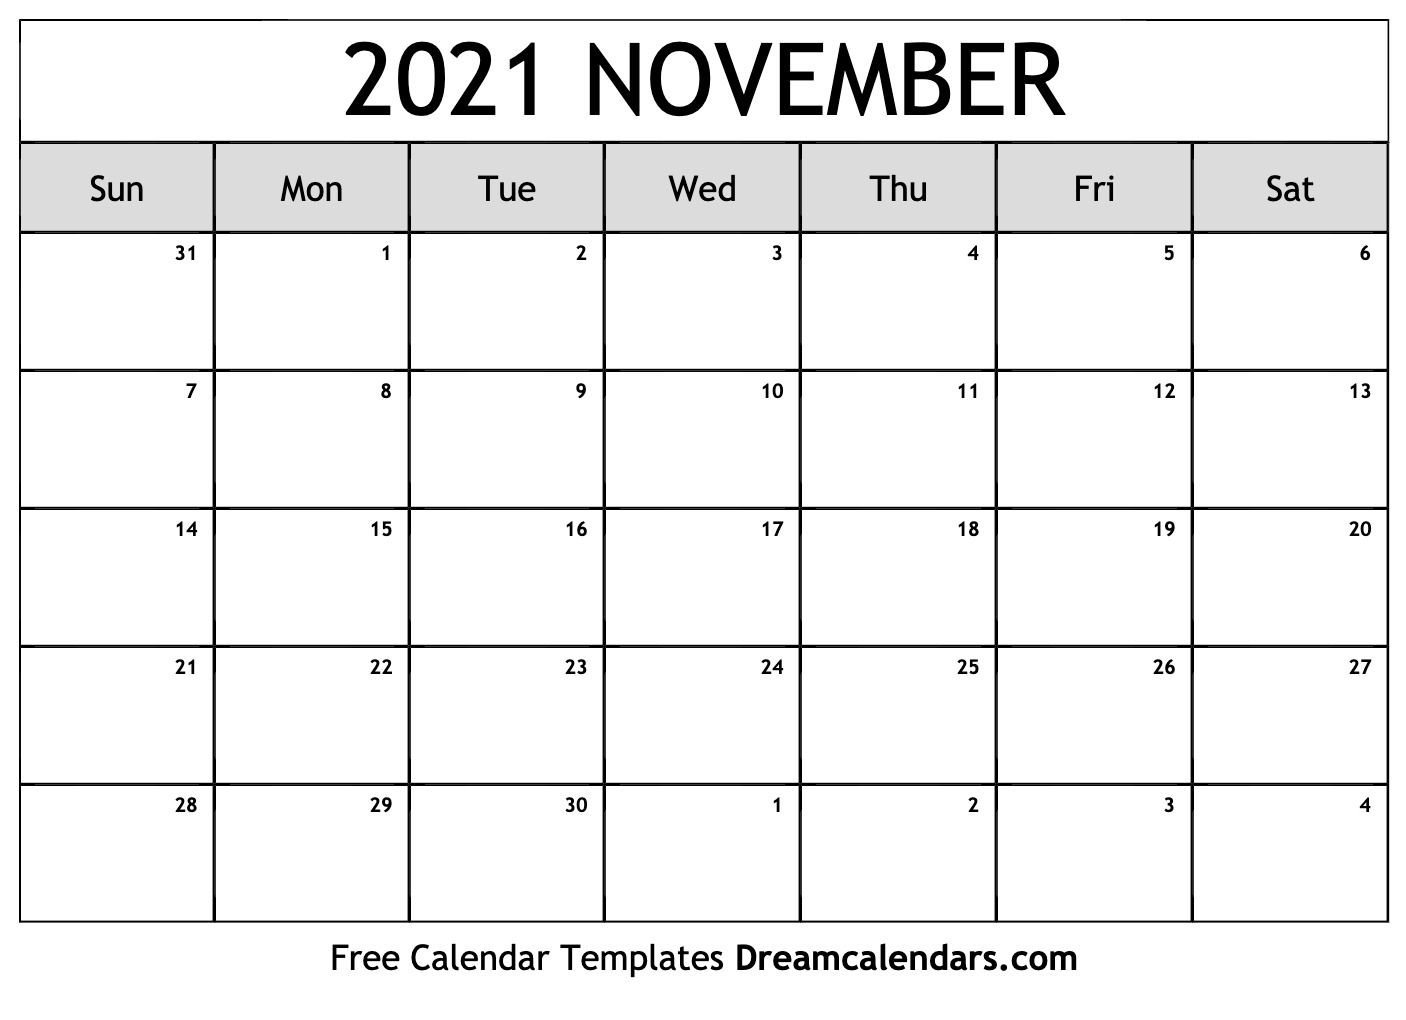 November 2021 Calendar Free Printable with Holidays and Observances